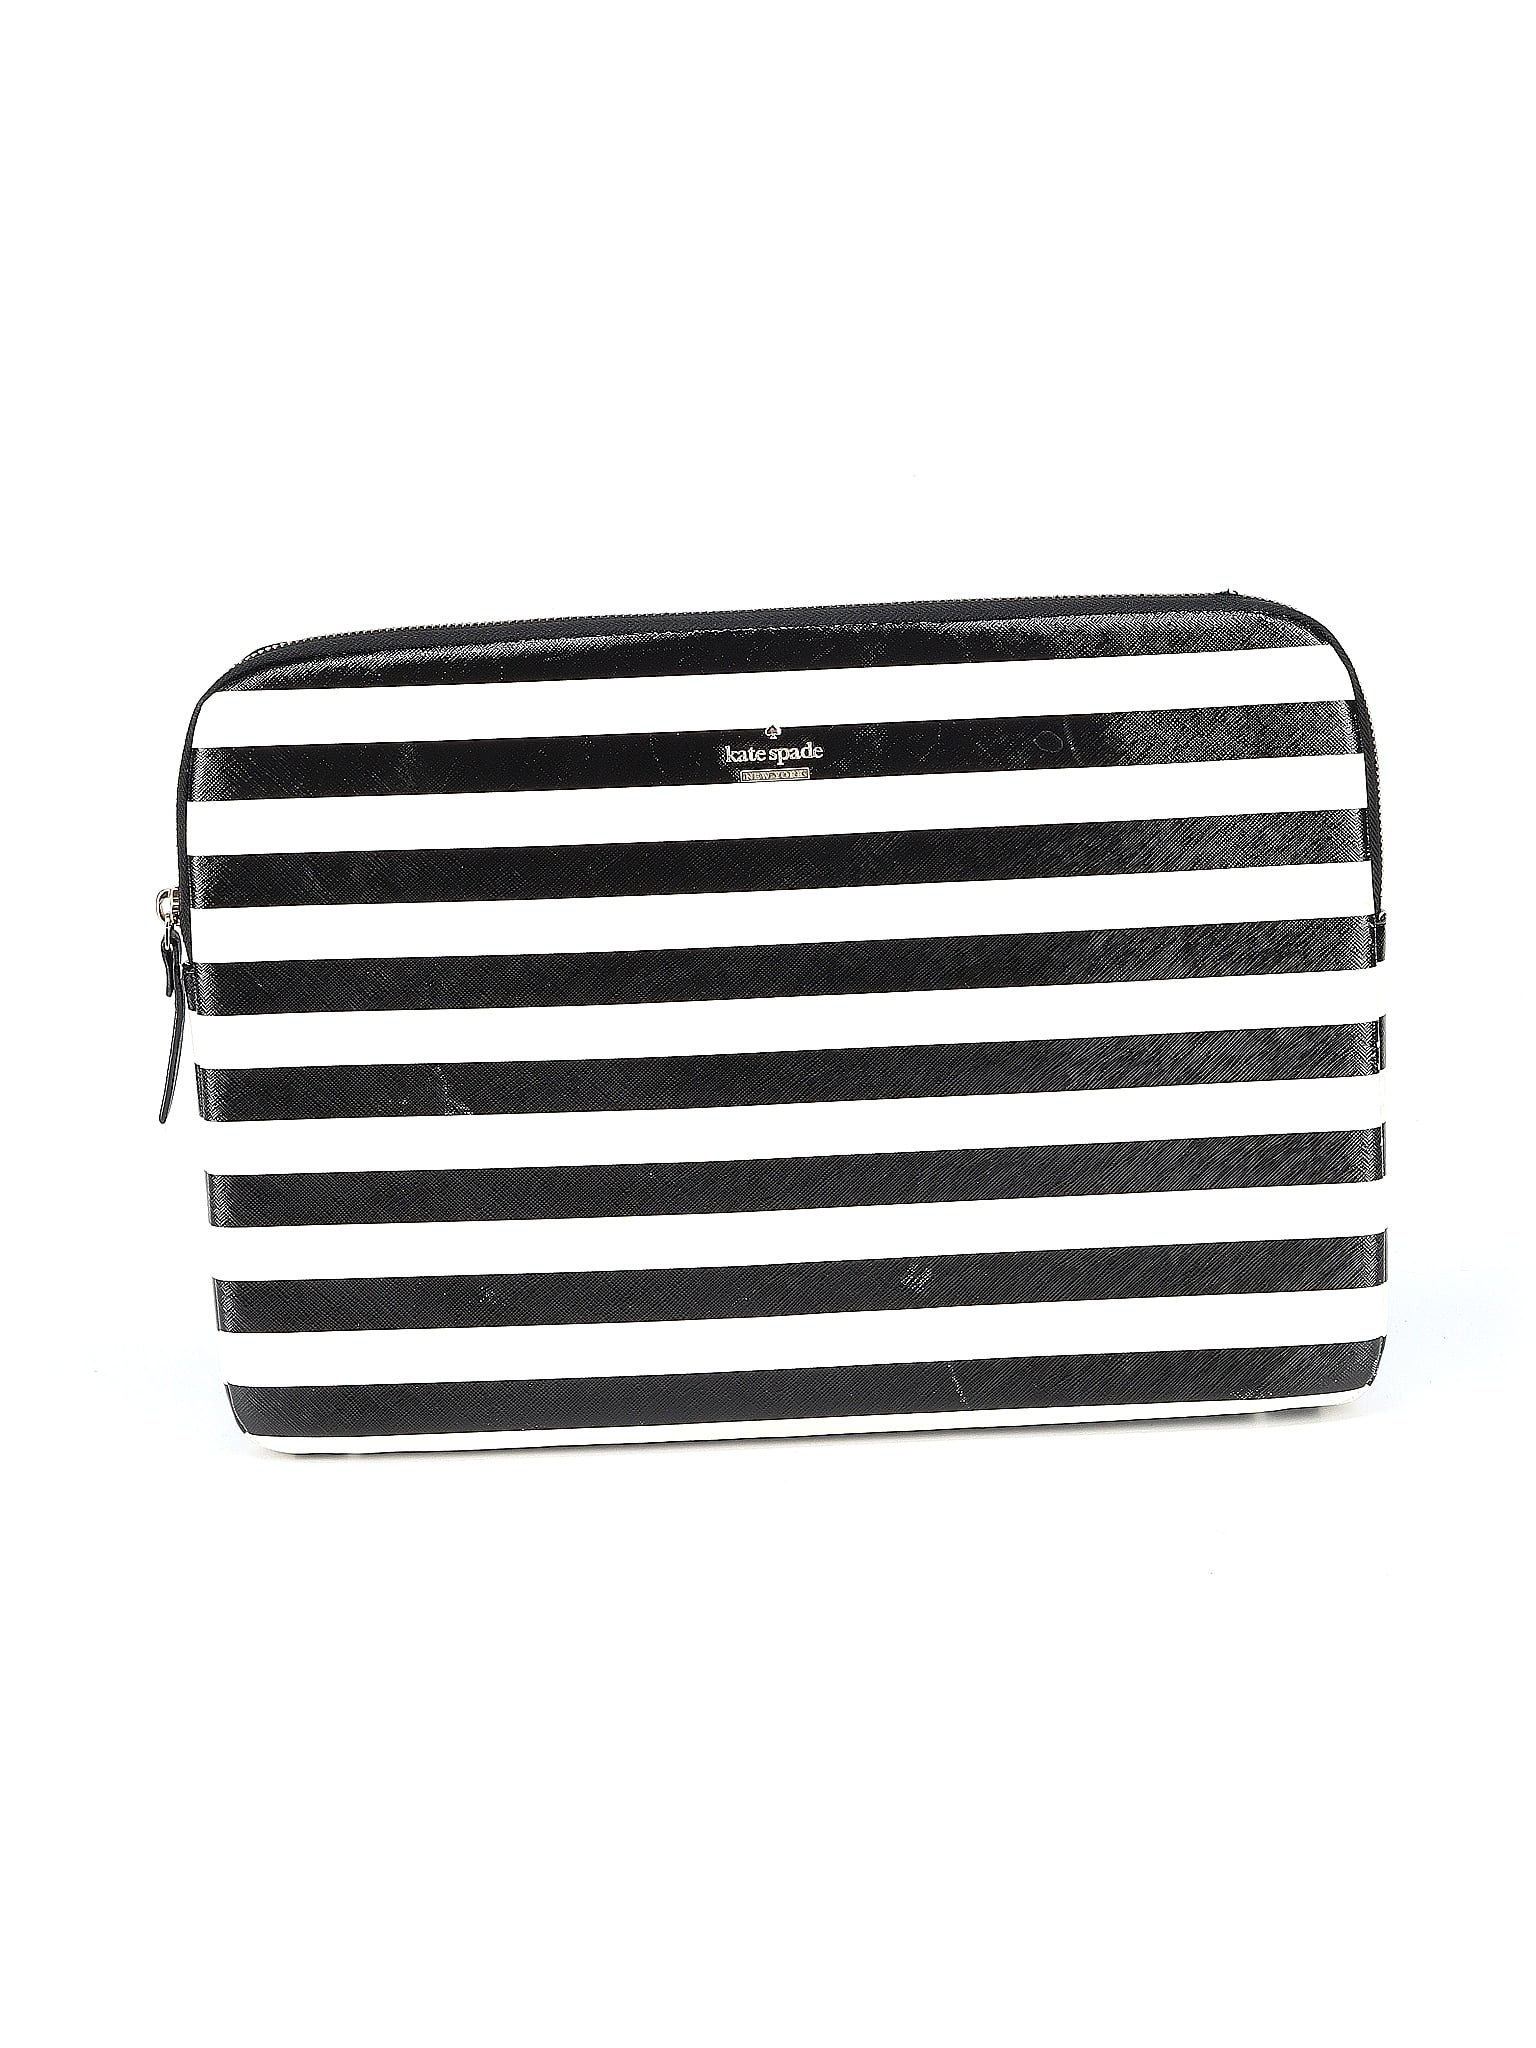 Designer Laptop Covers & Cases On Sale - Authenticated Resale